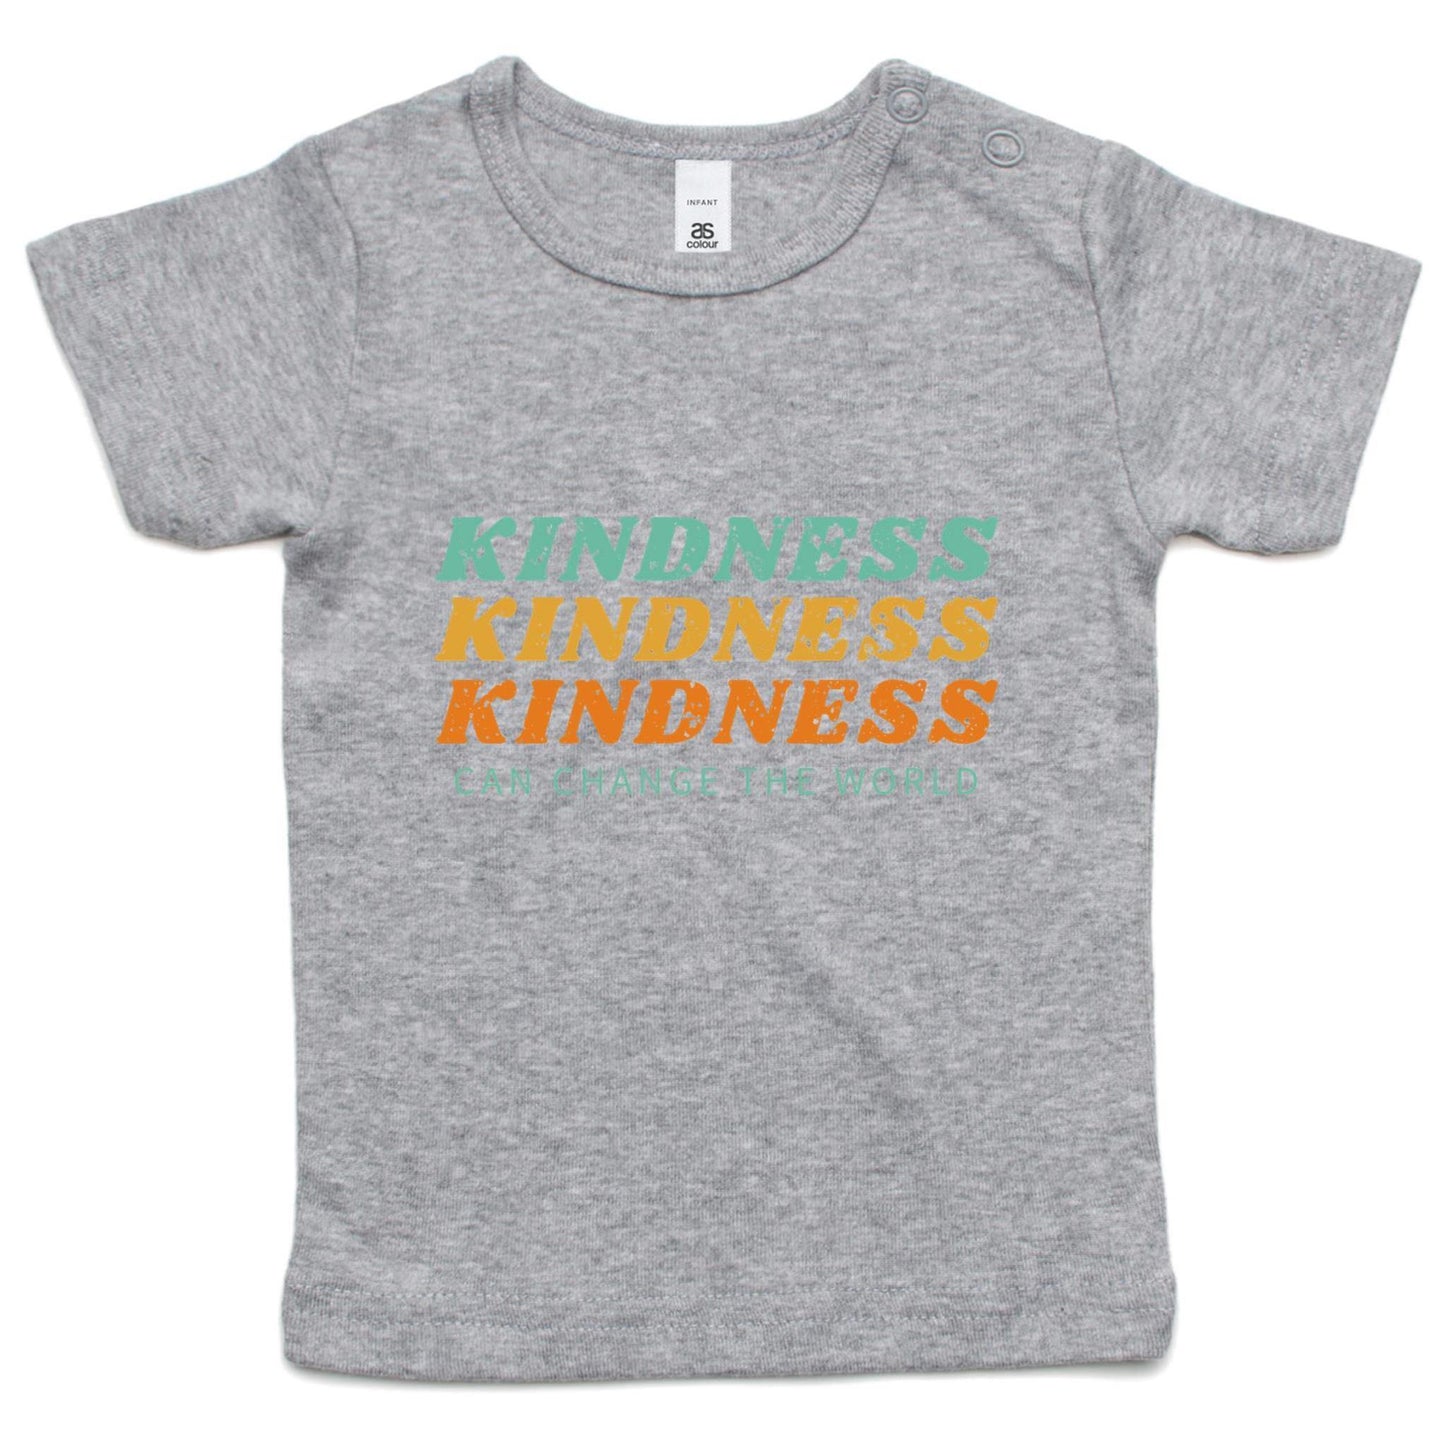 Kindness Can Change The World - Baby T-shirt Grey Marle Baby T-shirt kids